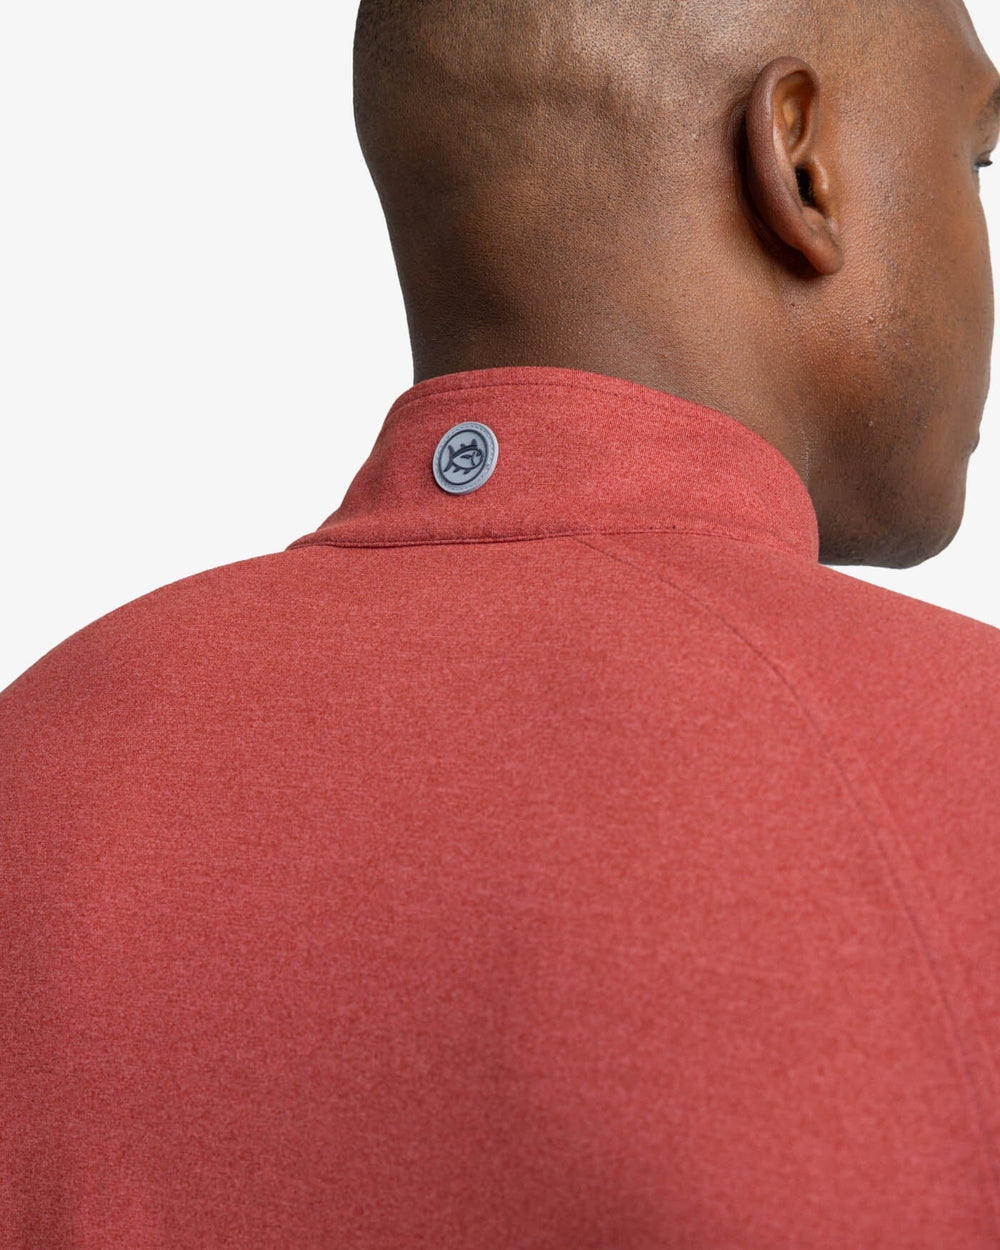 The yoke view of the Southern Tide Cruiser Heather Quarter Zip Pullover by Southern Tide - Heather Tuscany Red